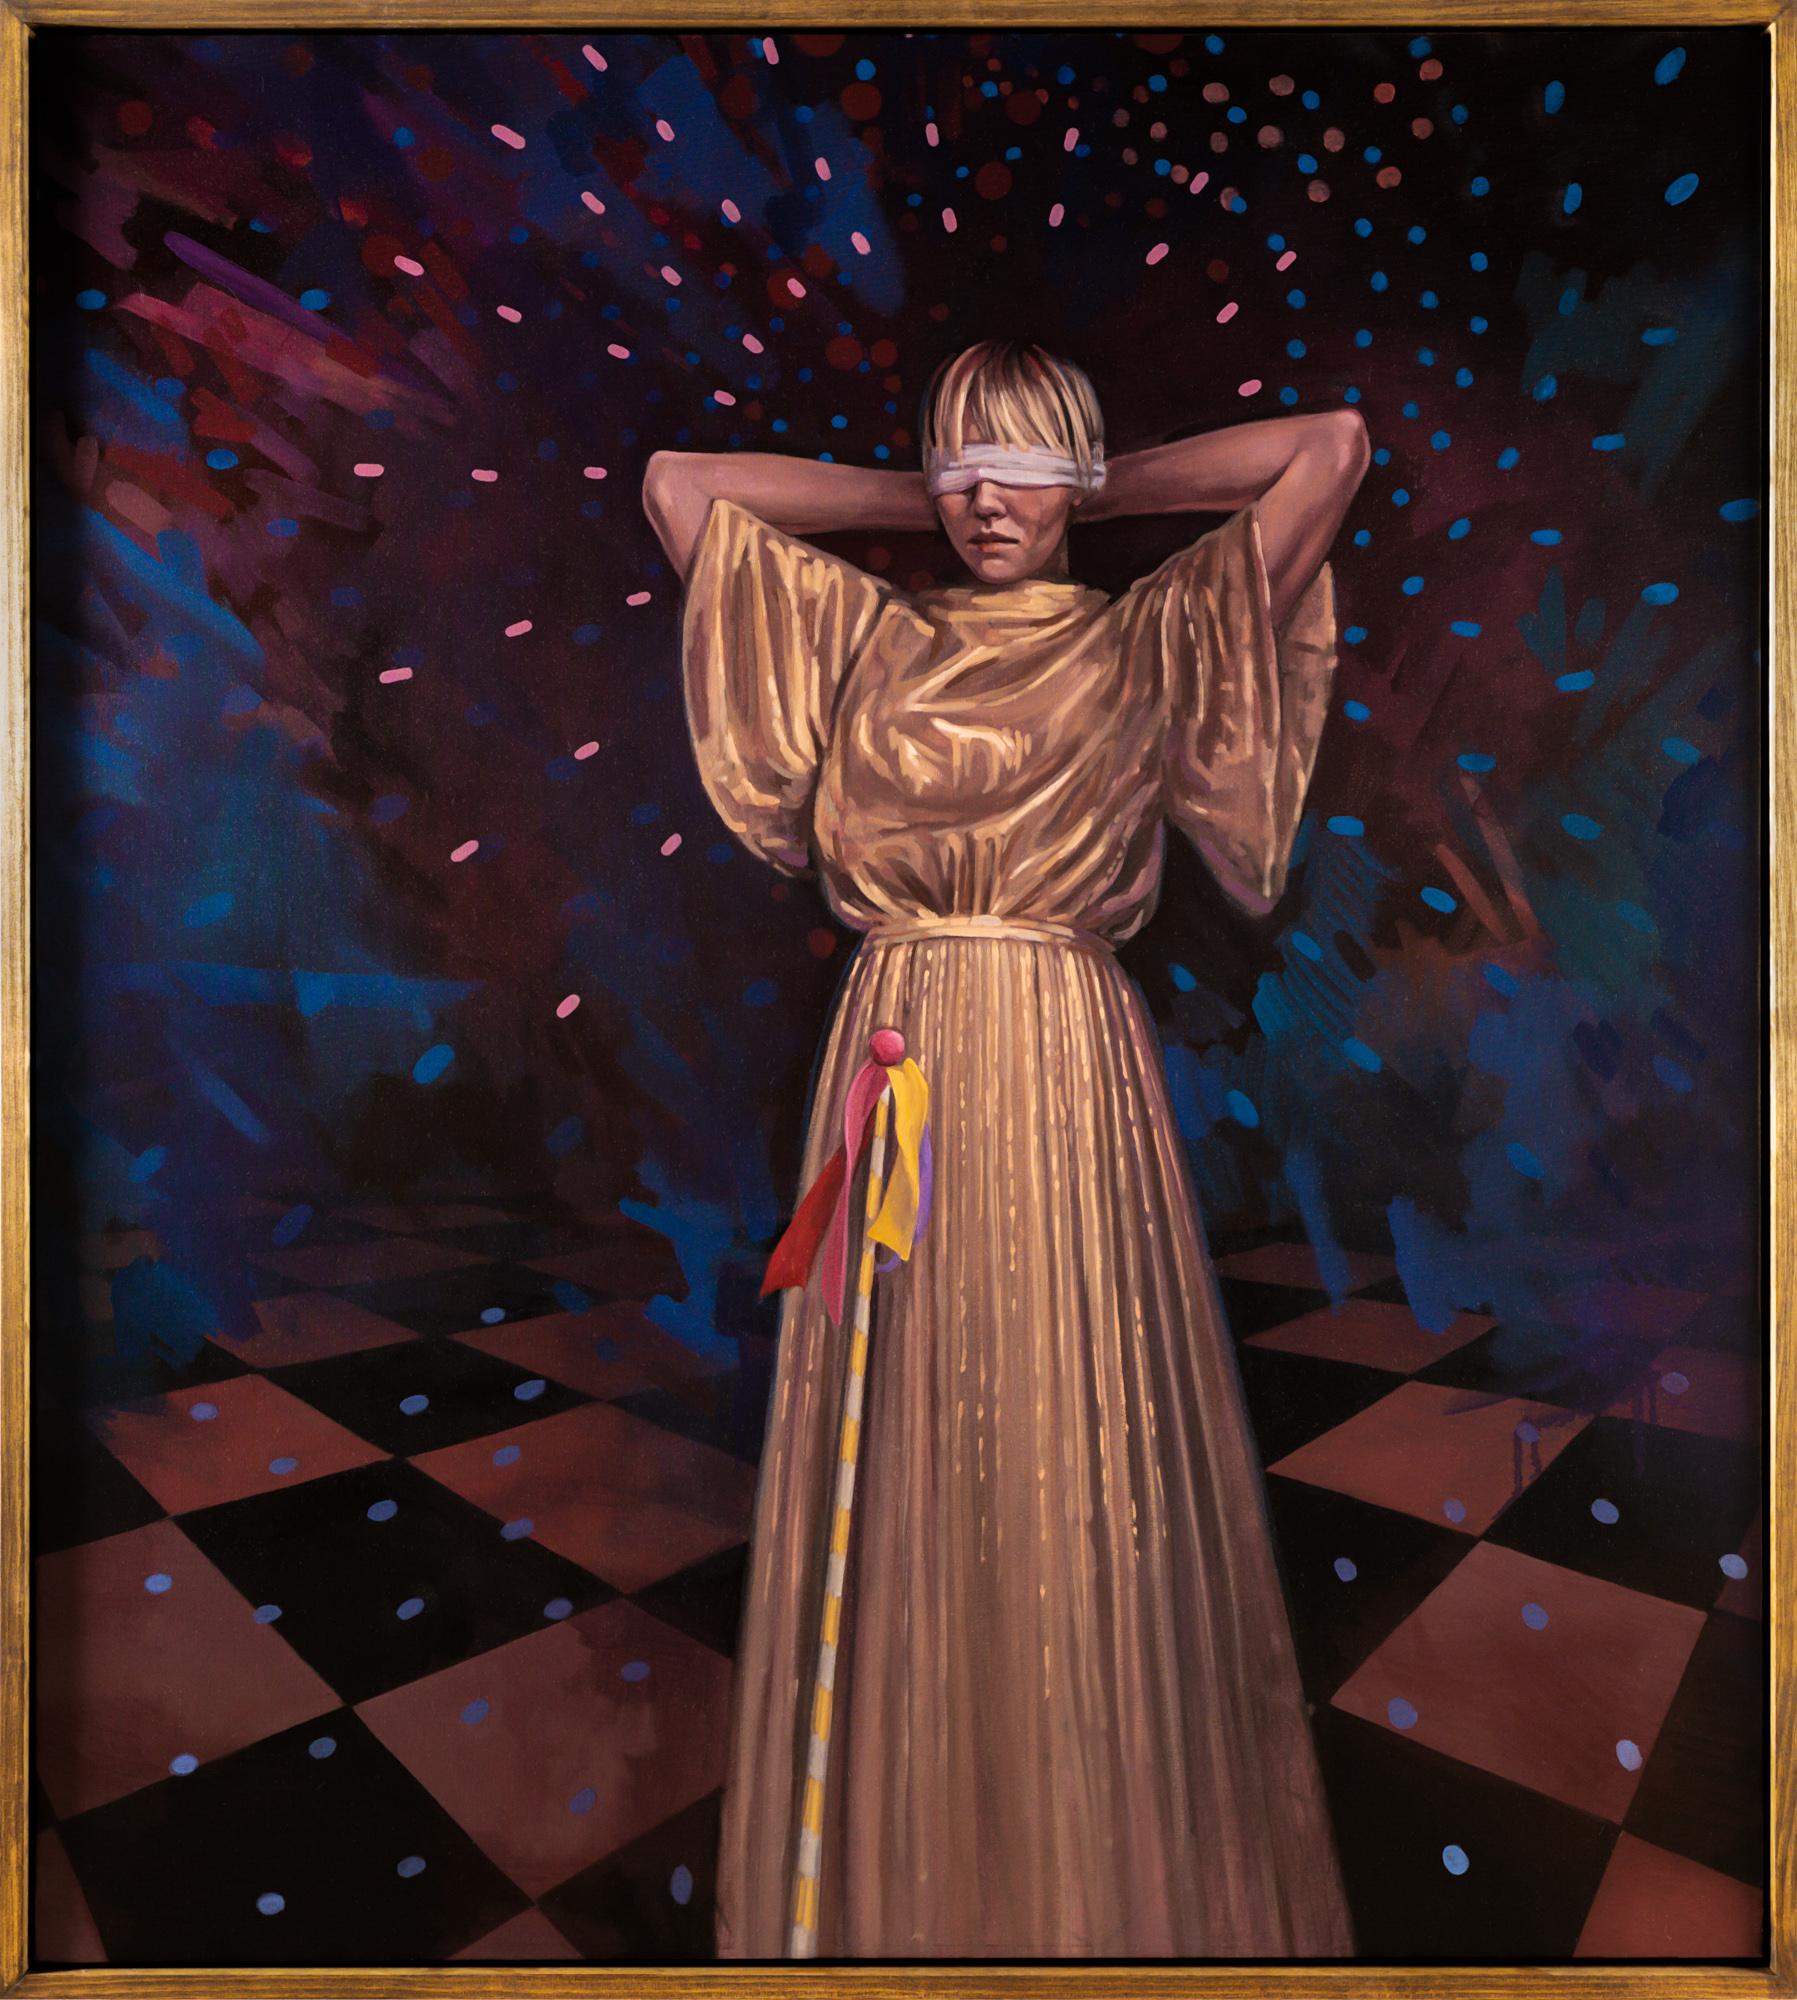 "Vision Quest" Blindfolded female figure, disco ball, Oil on canvas - Painting by Katherine Fraser